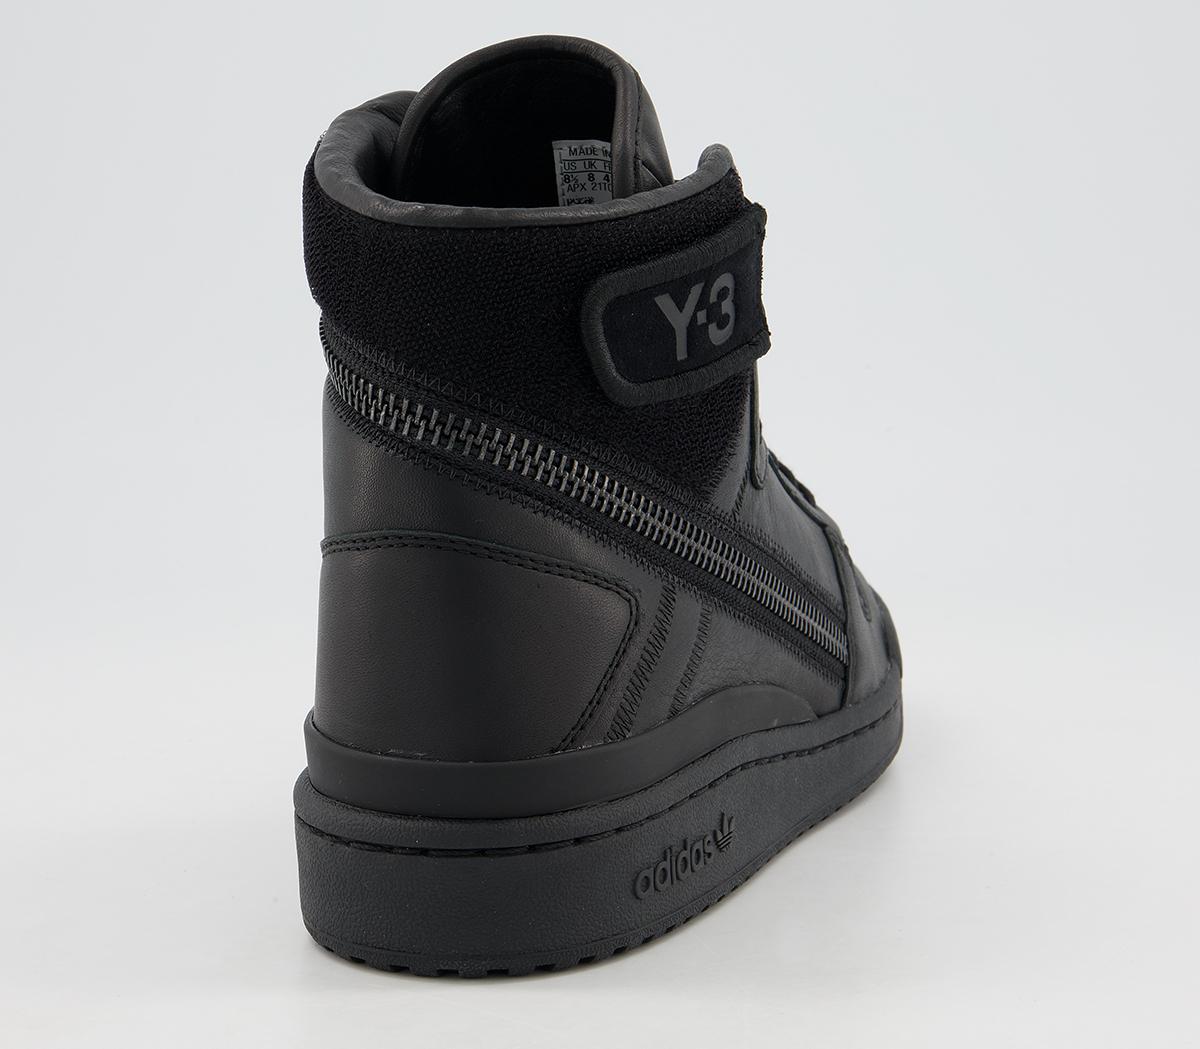 adidas Y3 Y3 Forum High Og Trainers Black - His trainers